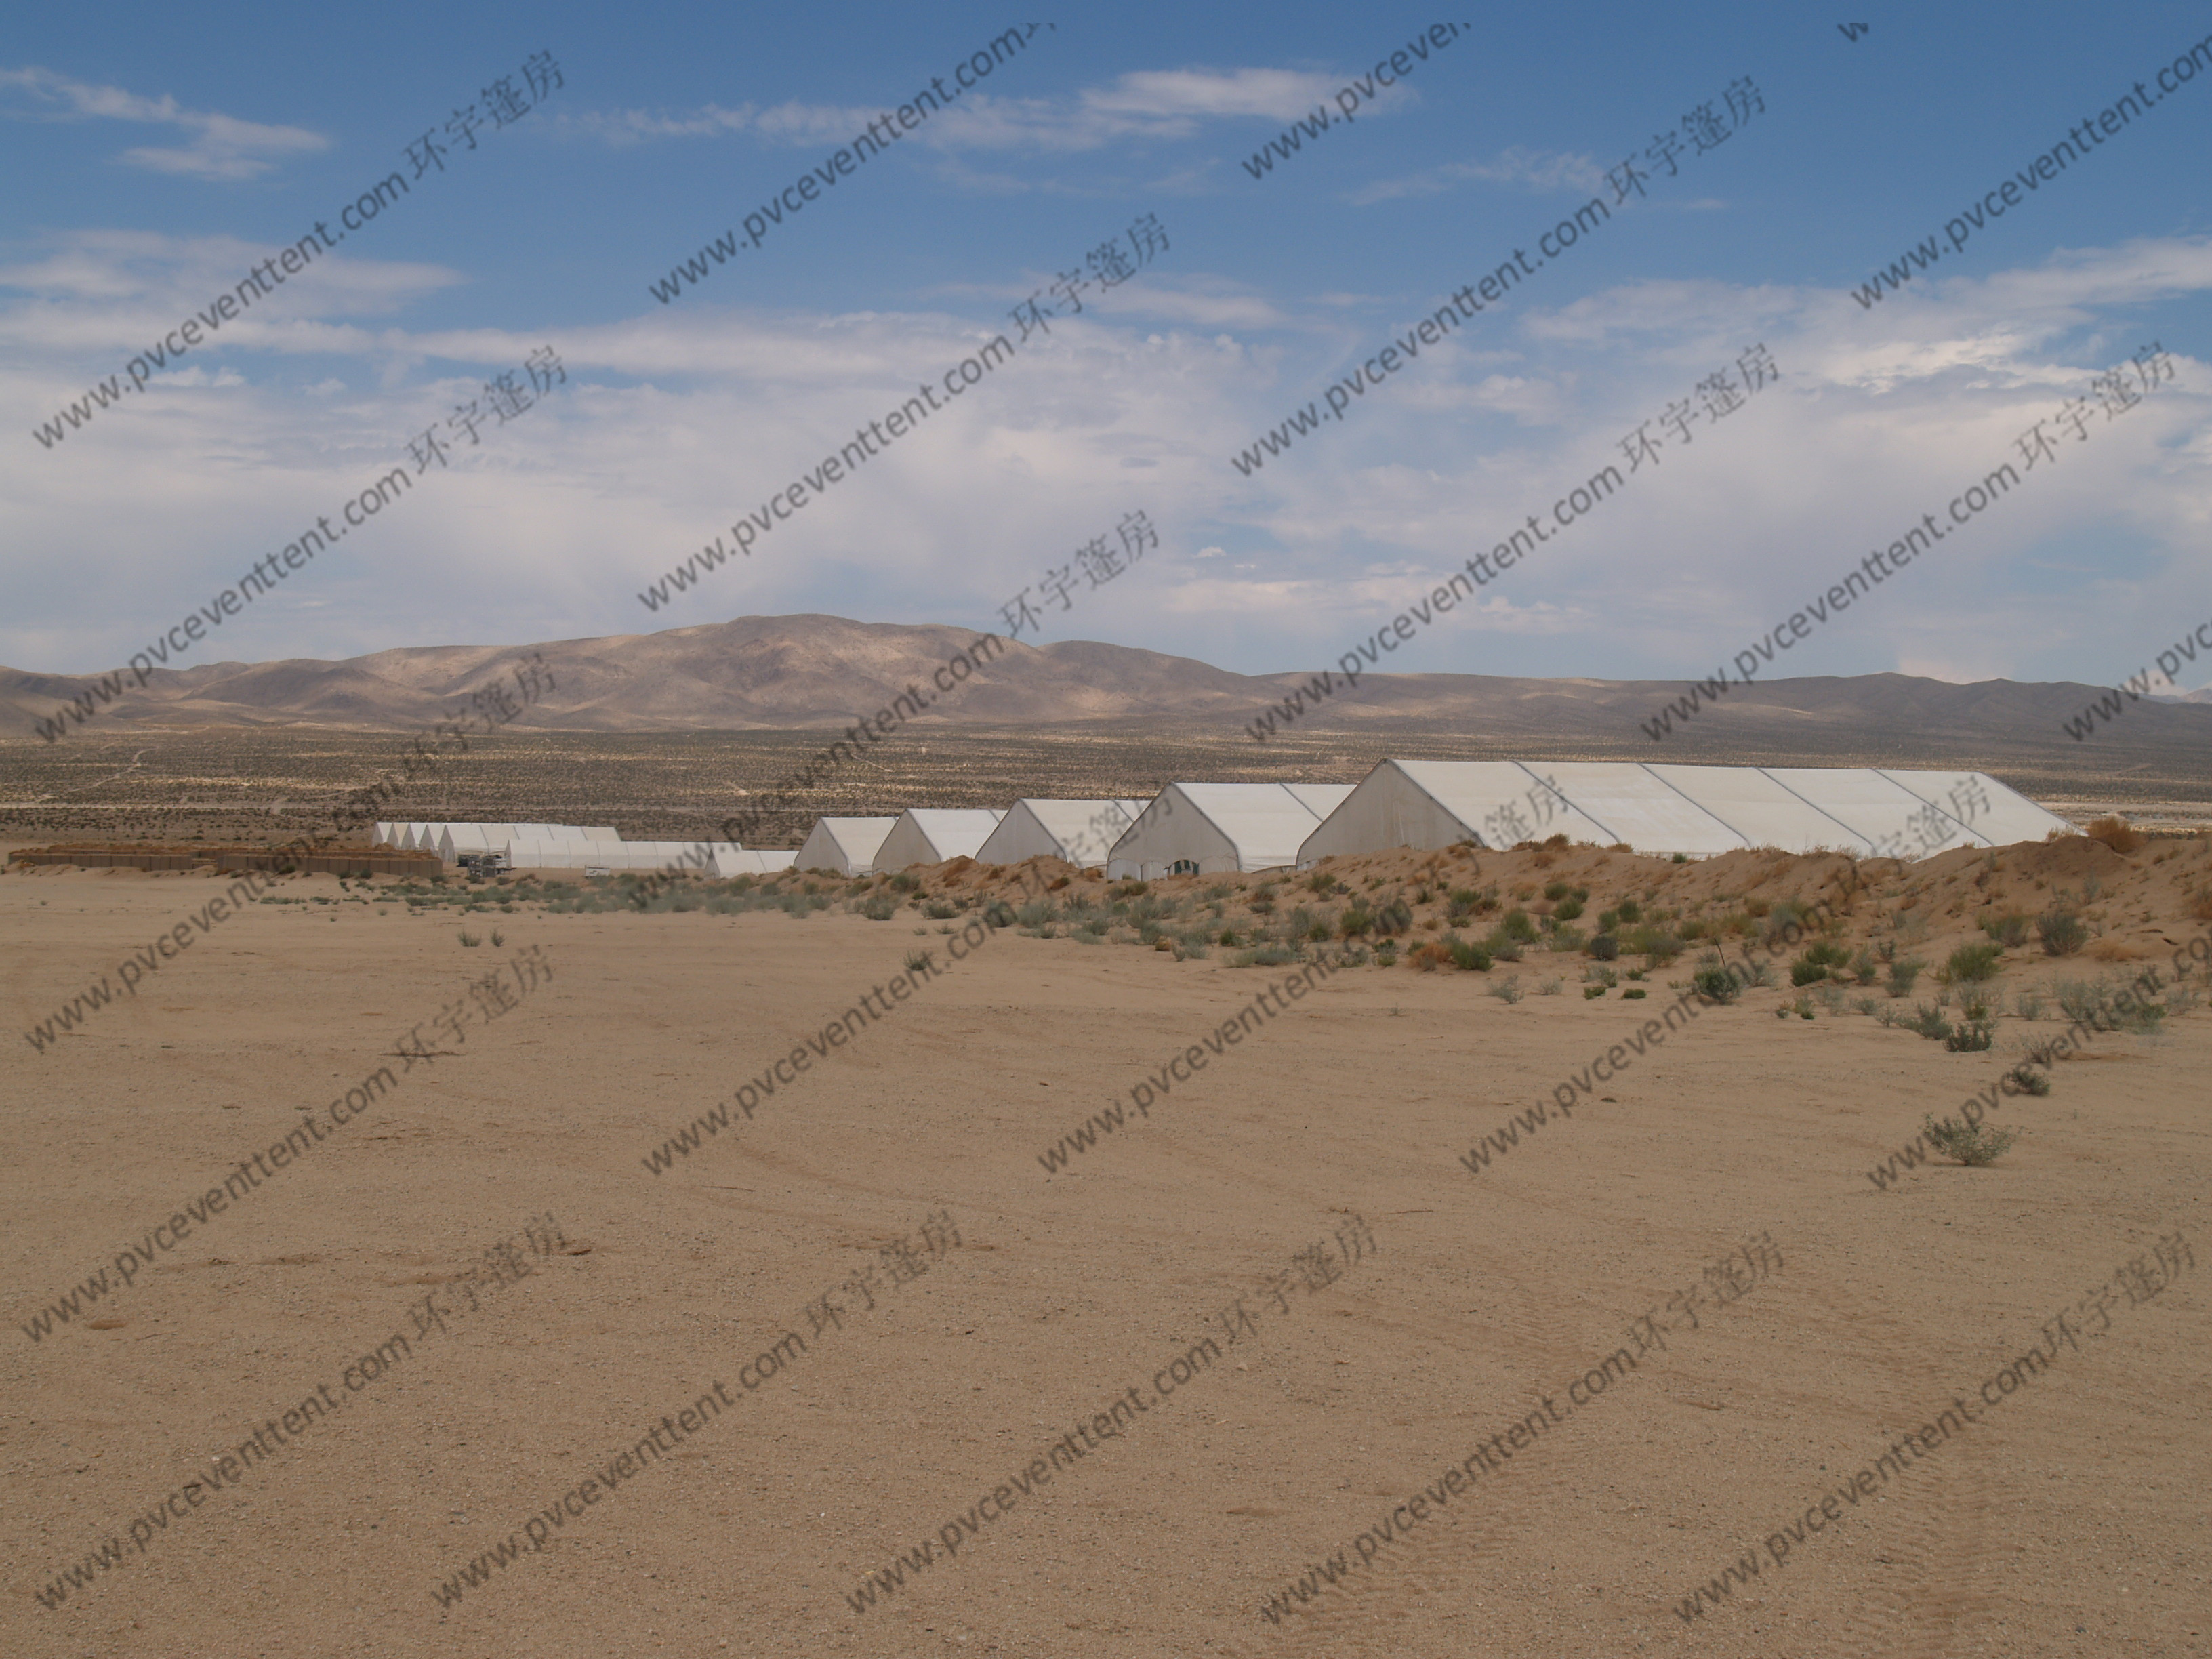 Peach Shape Curved Tent Hard Pressed Extruded Aluminum Alloy Floor System In Desert